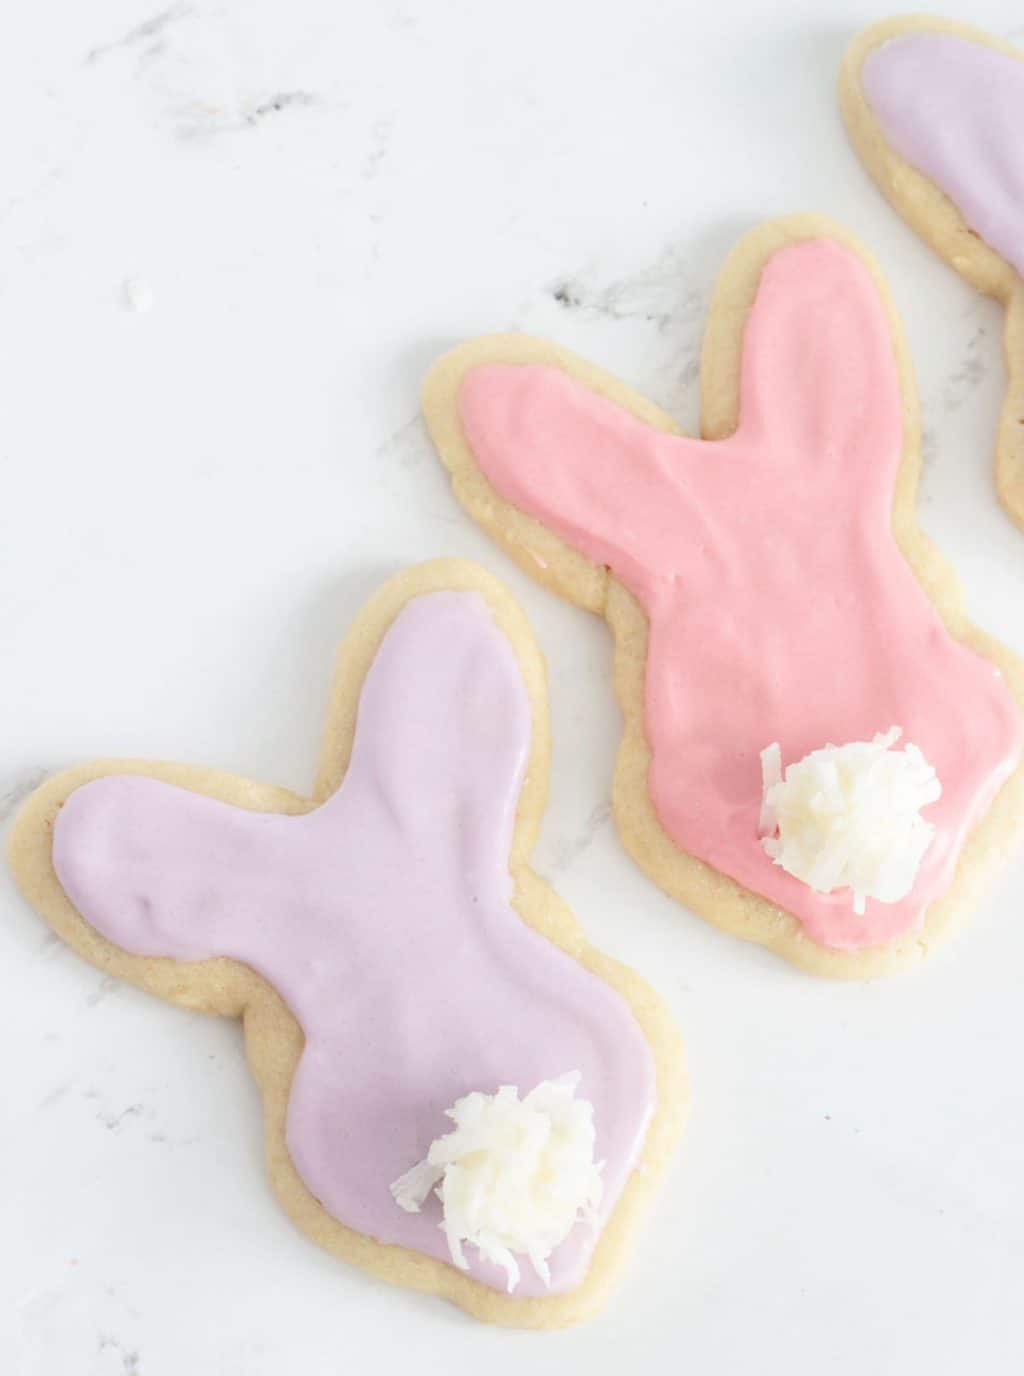 Coconut bunny tail cookies